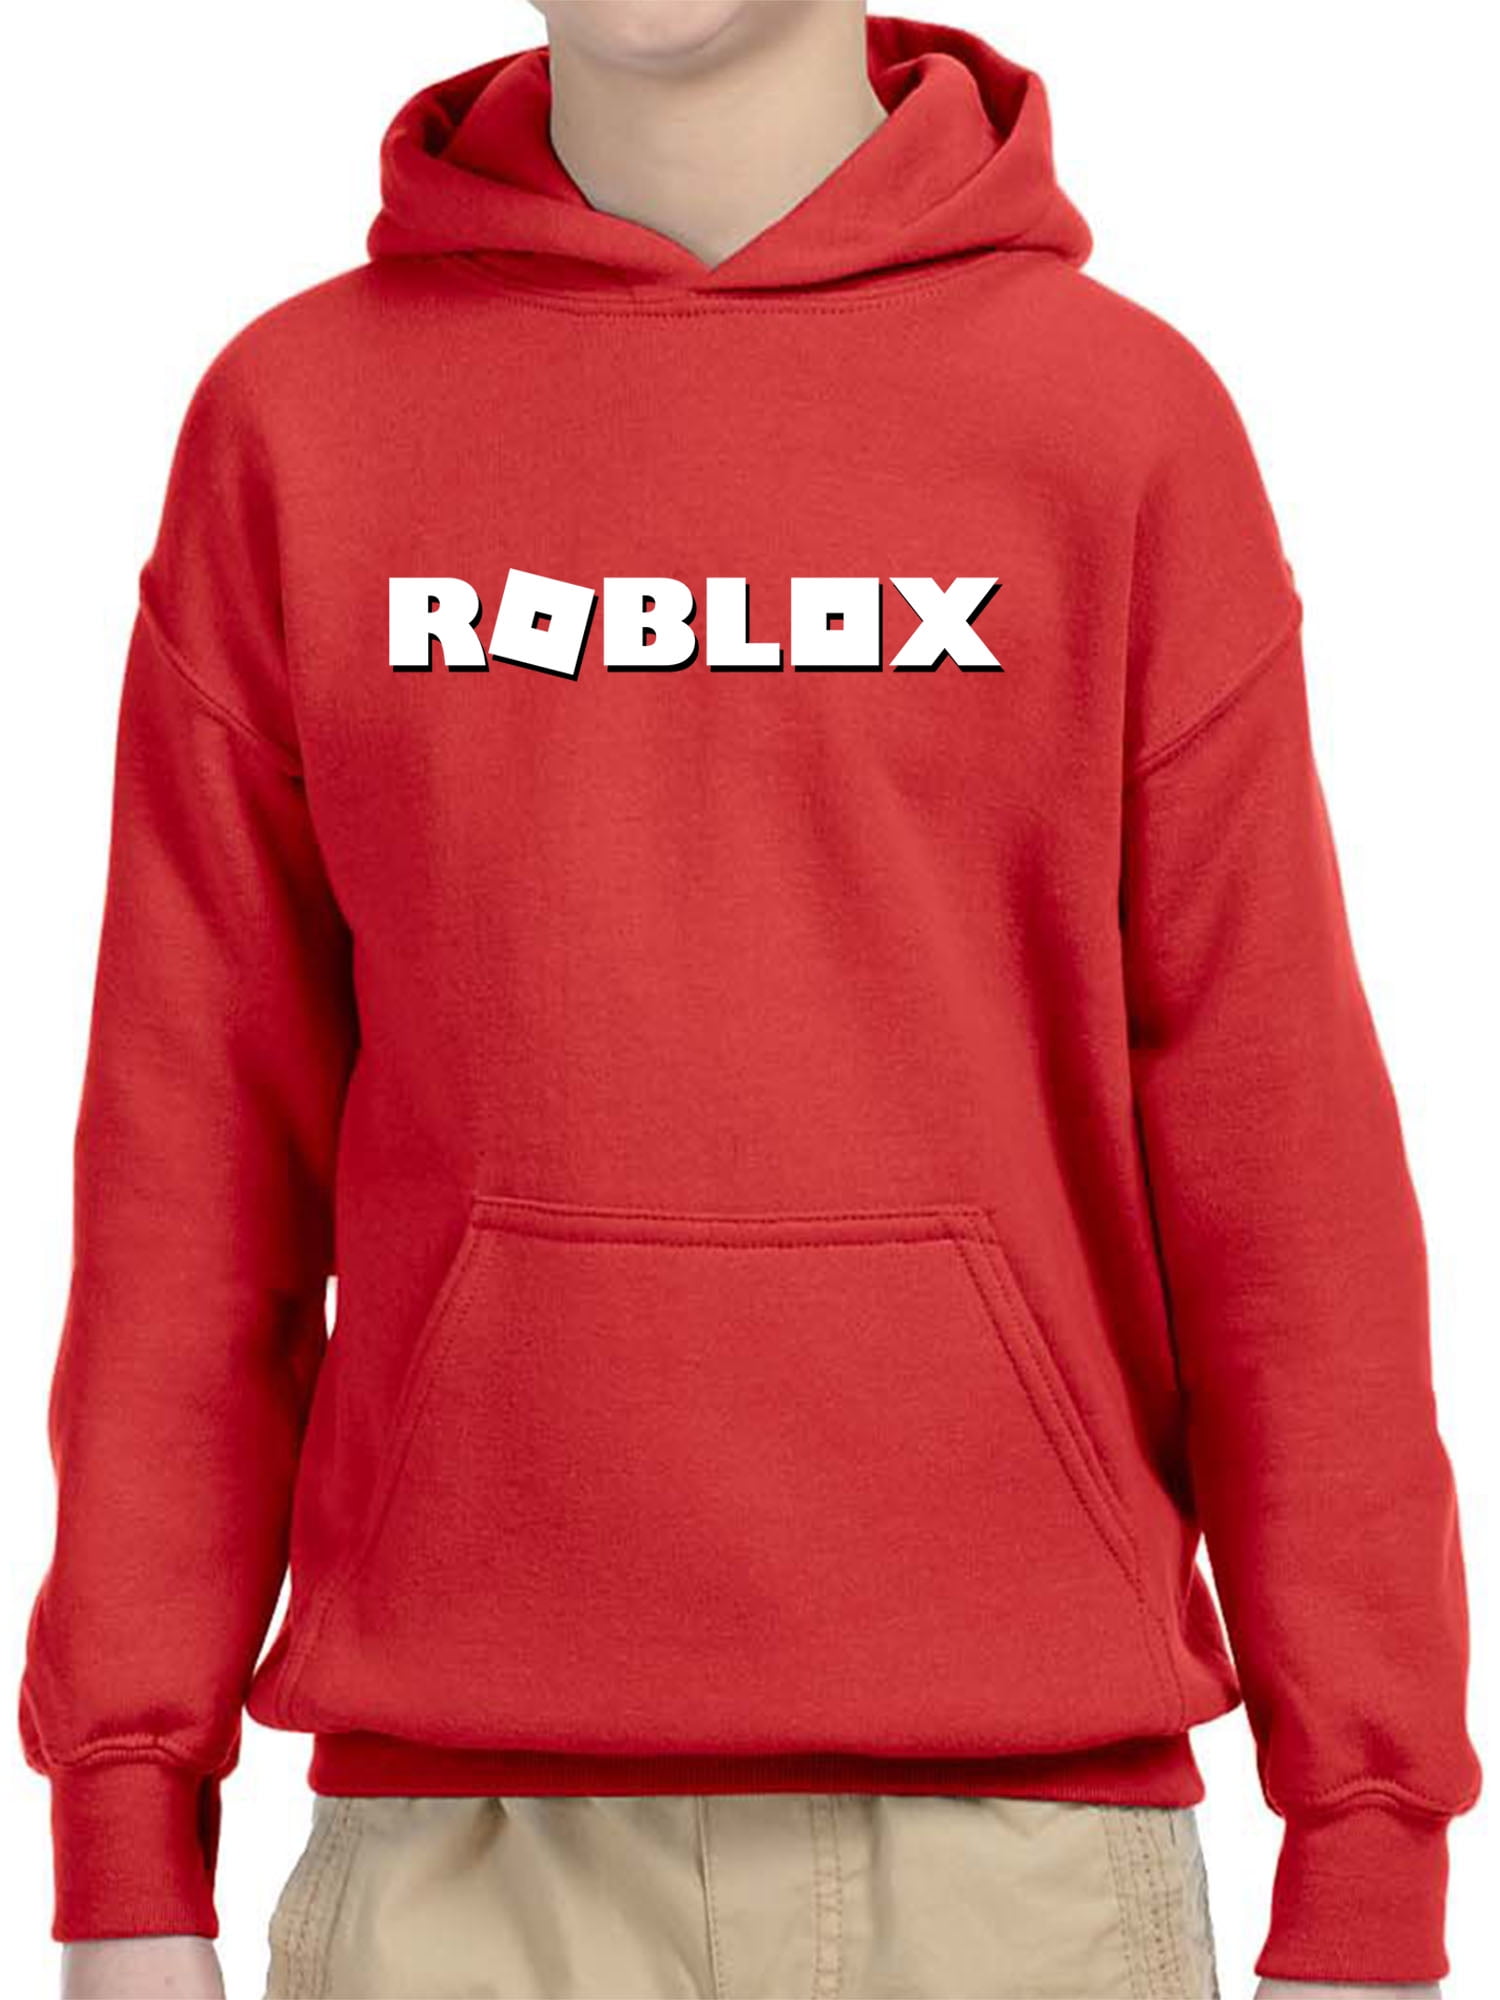 new way new way 923 youth t shirt roblox logo game accent small black walmartcom